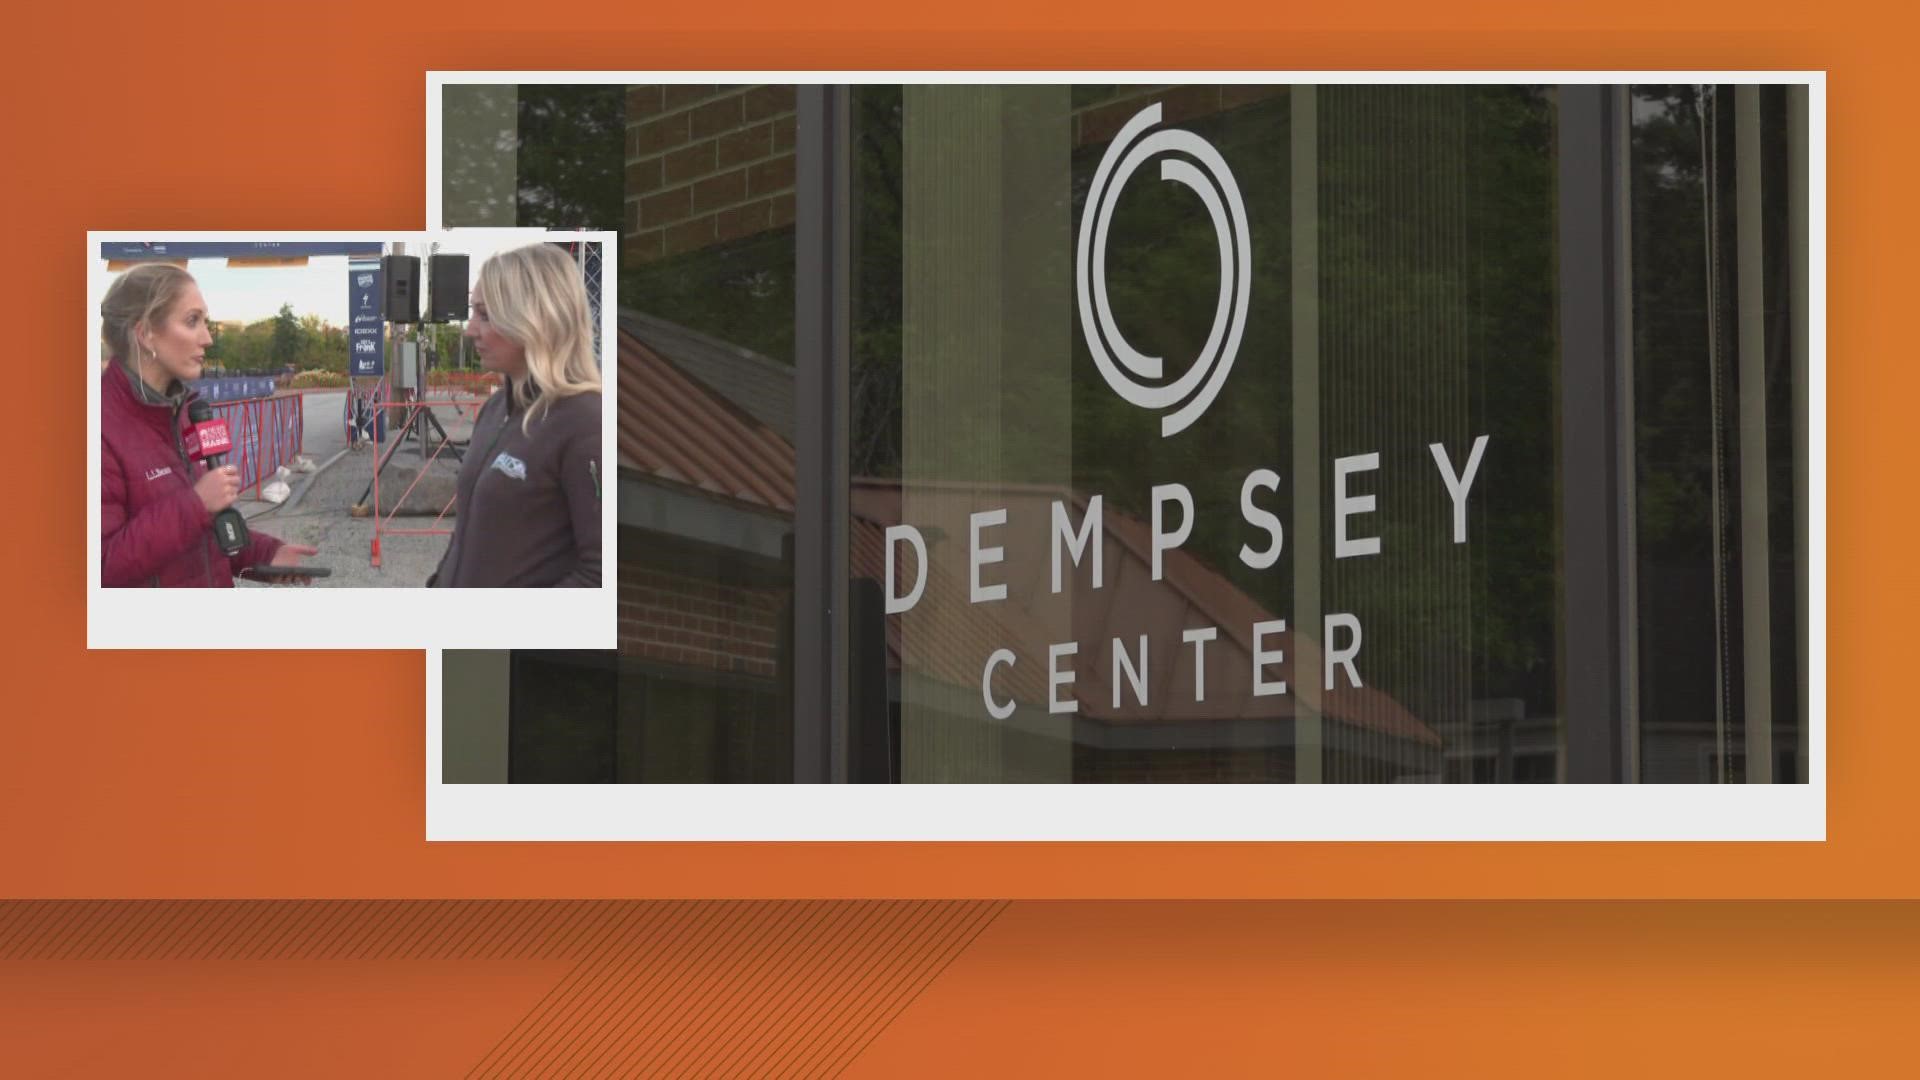 This year's event raised a record $1.6 million for the Dempsey Center, which provides resources for those who have been impacted by cancer.